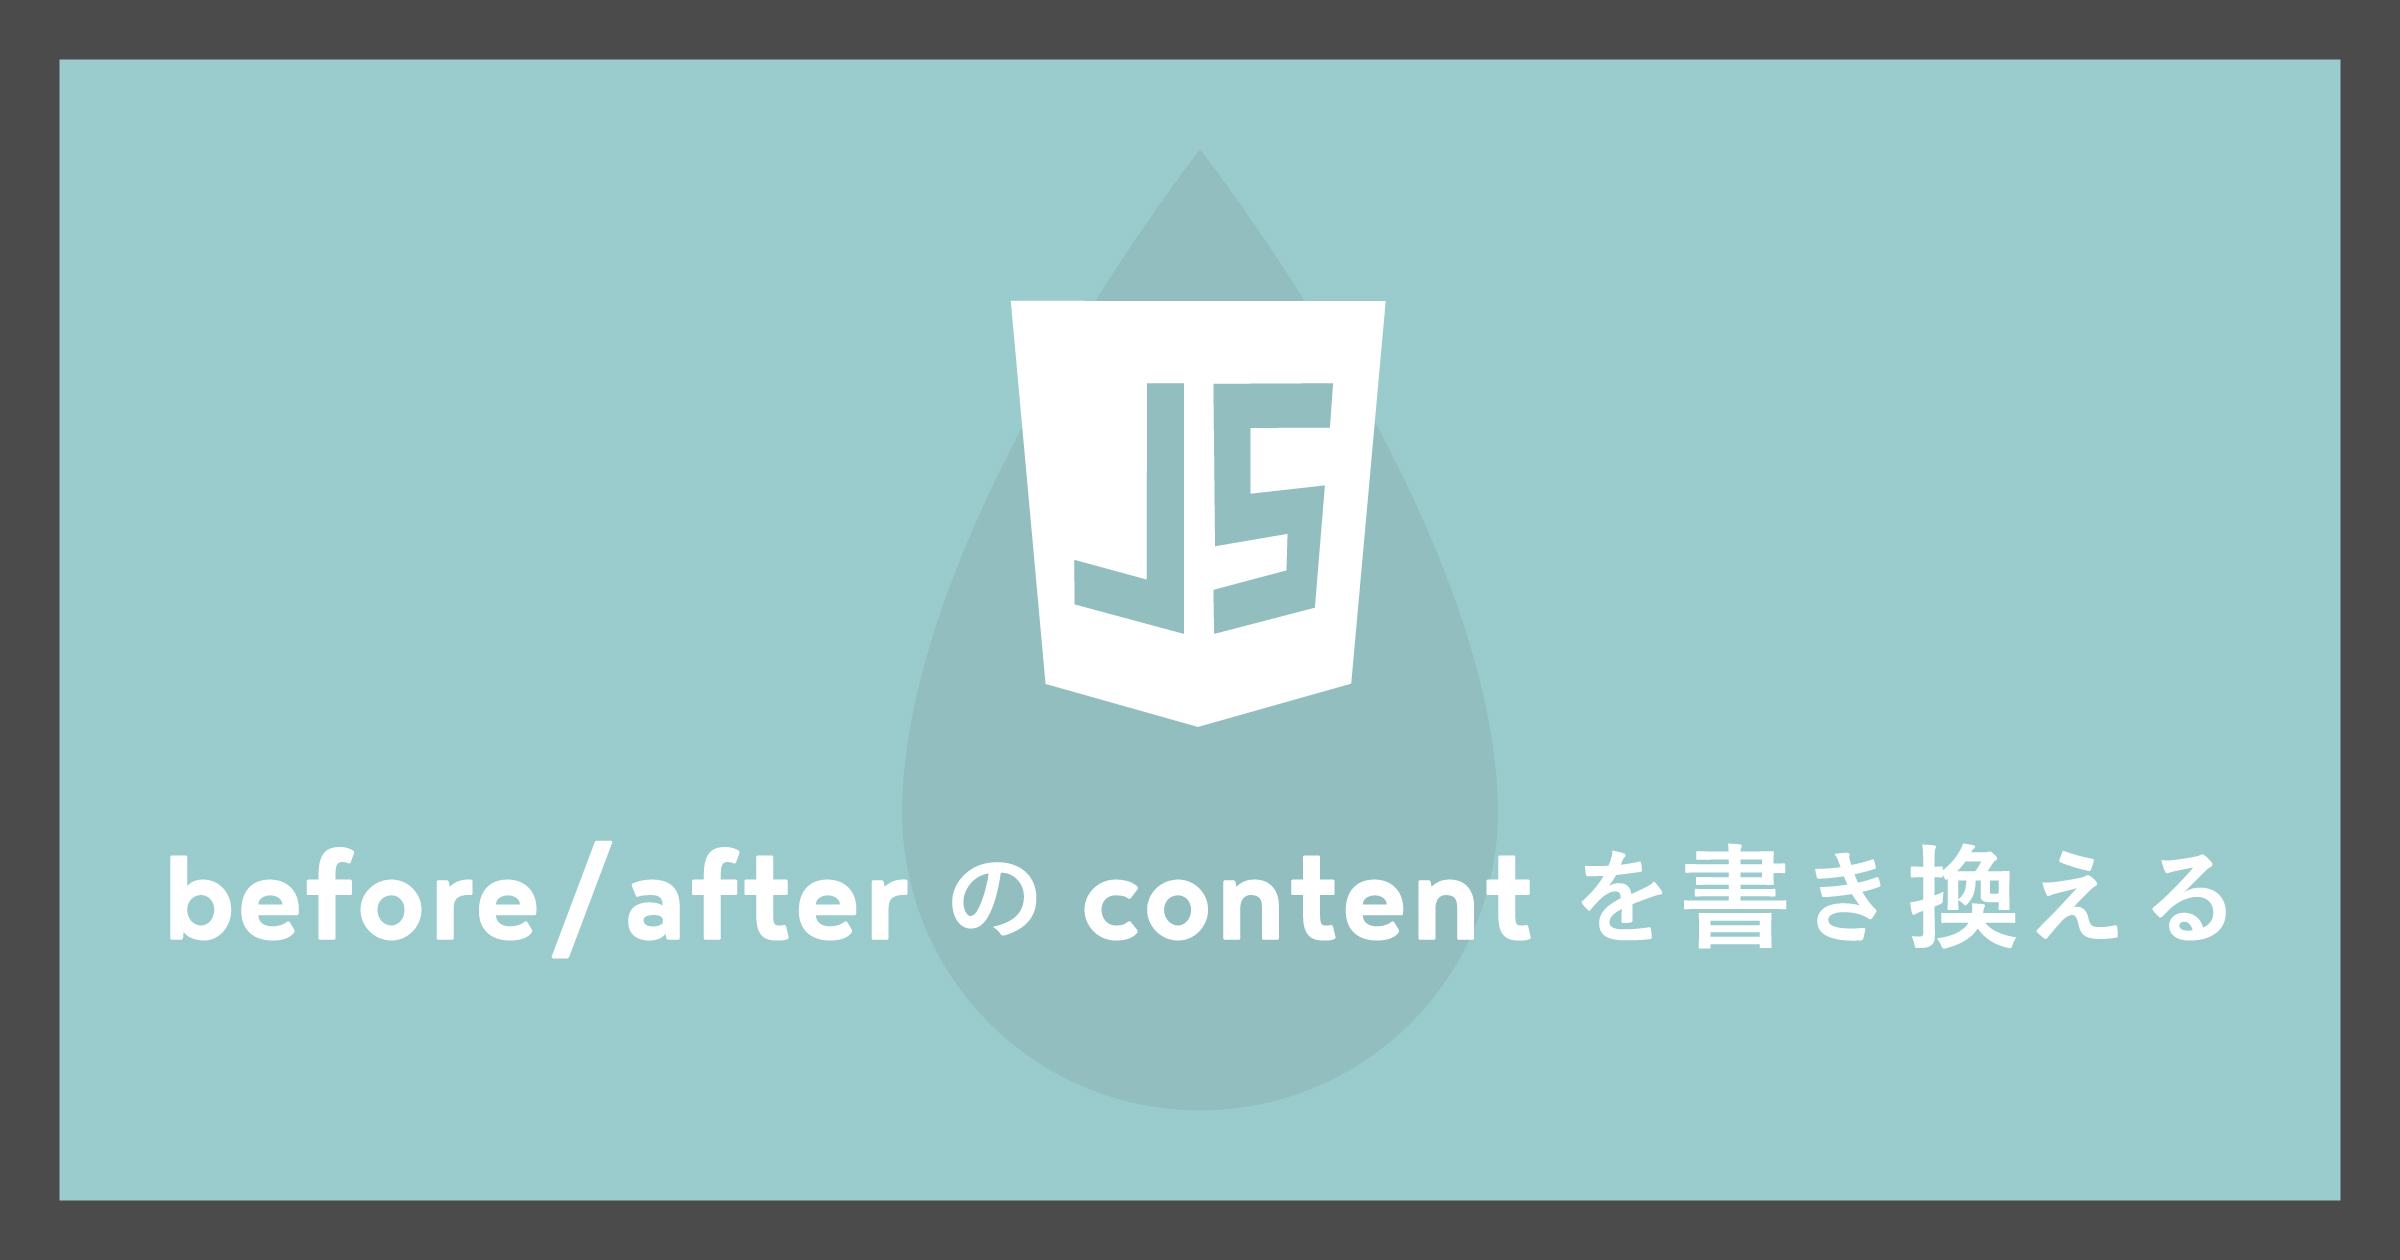 「JavaScriptでbefore/afterのcontentを書き換える」のアイキャッチ画像